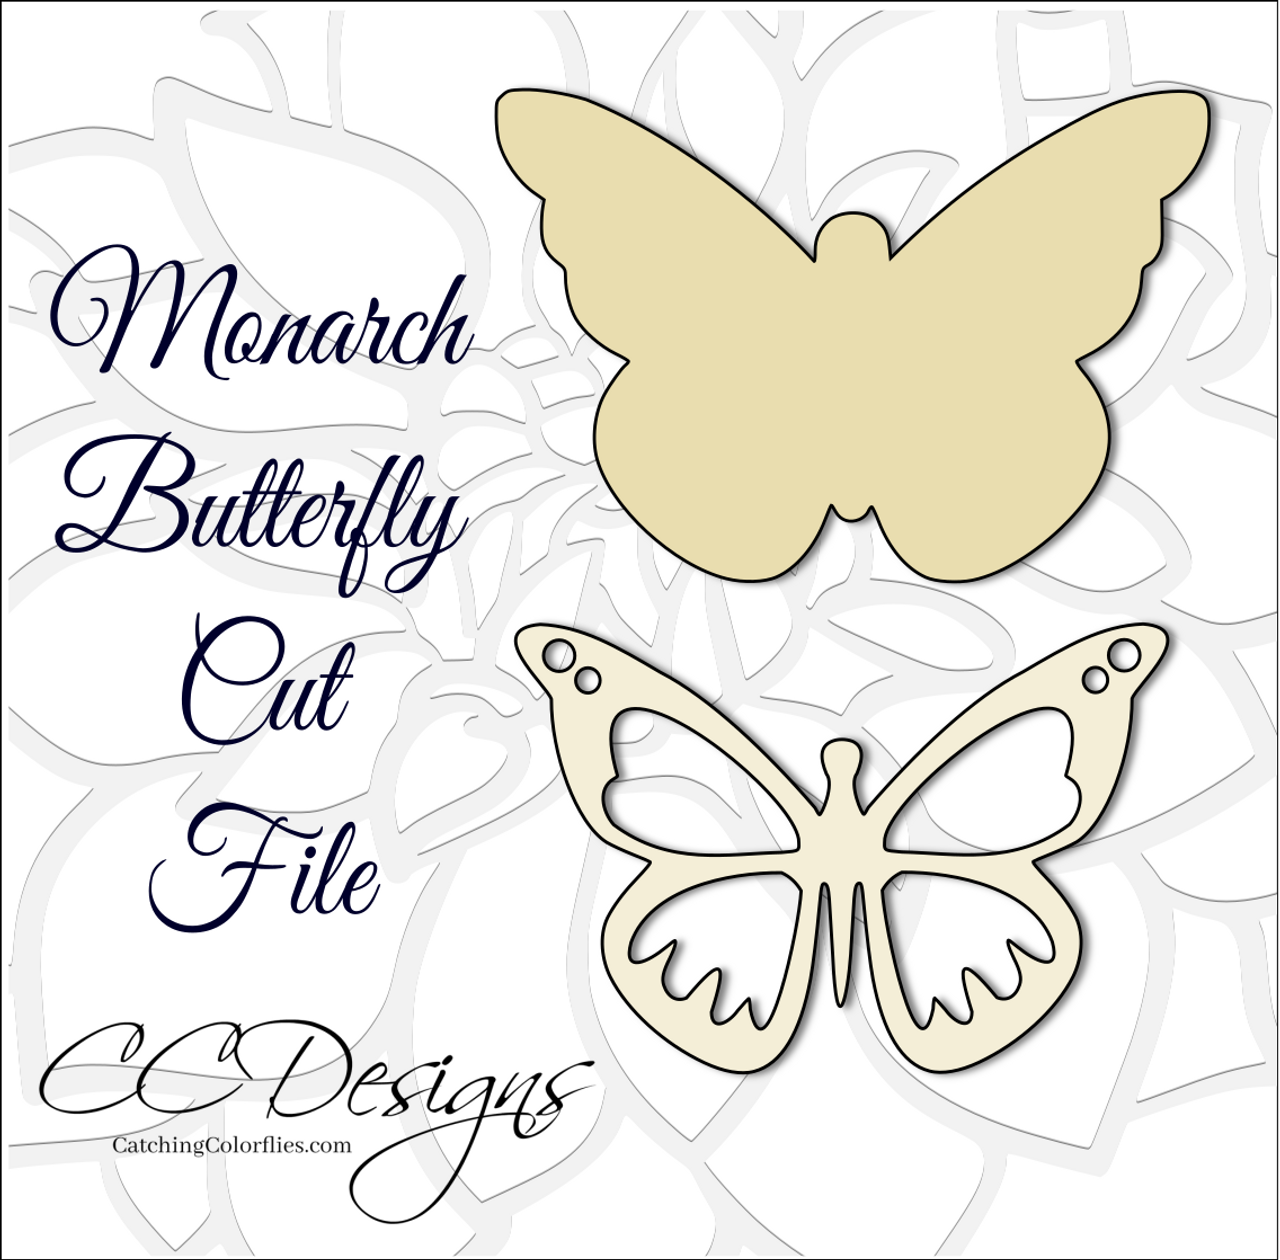 Download Monarch Butterfly Svg Cut File And Pdf Template Catching Colorflies